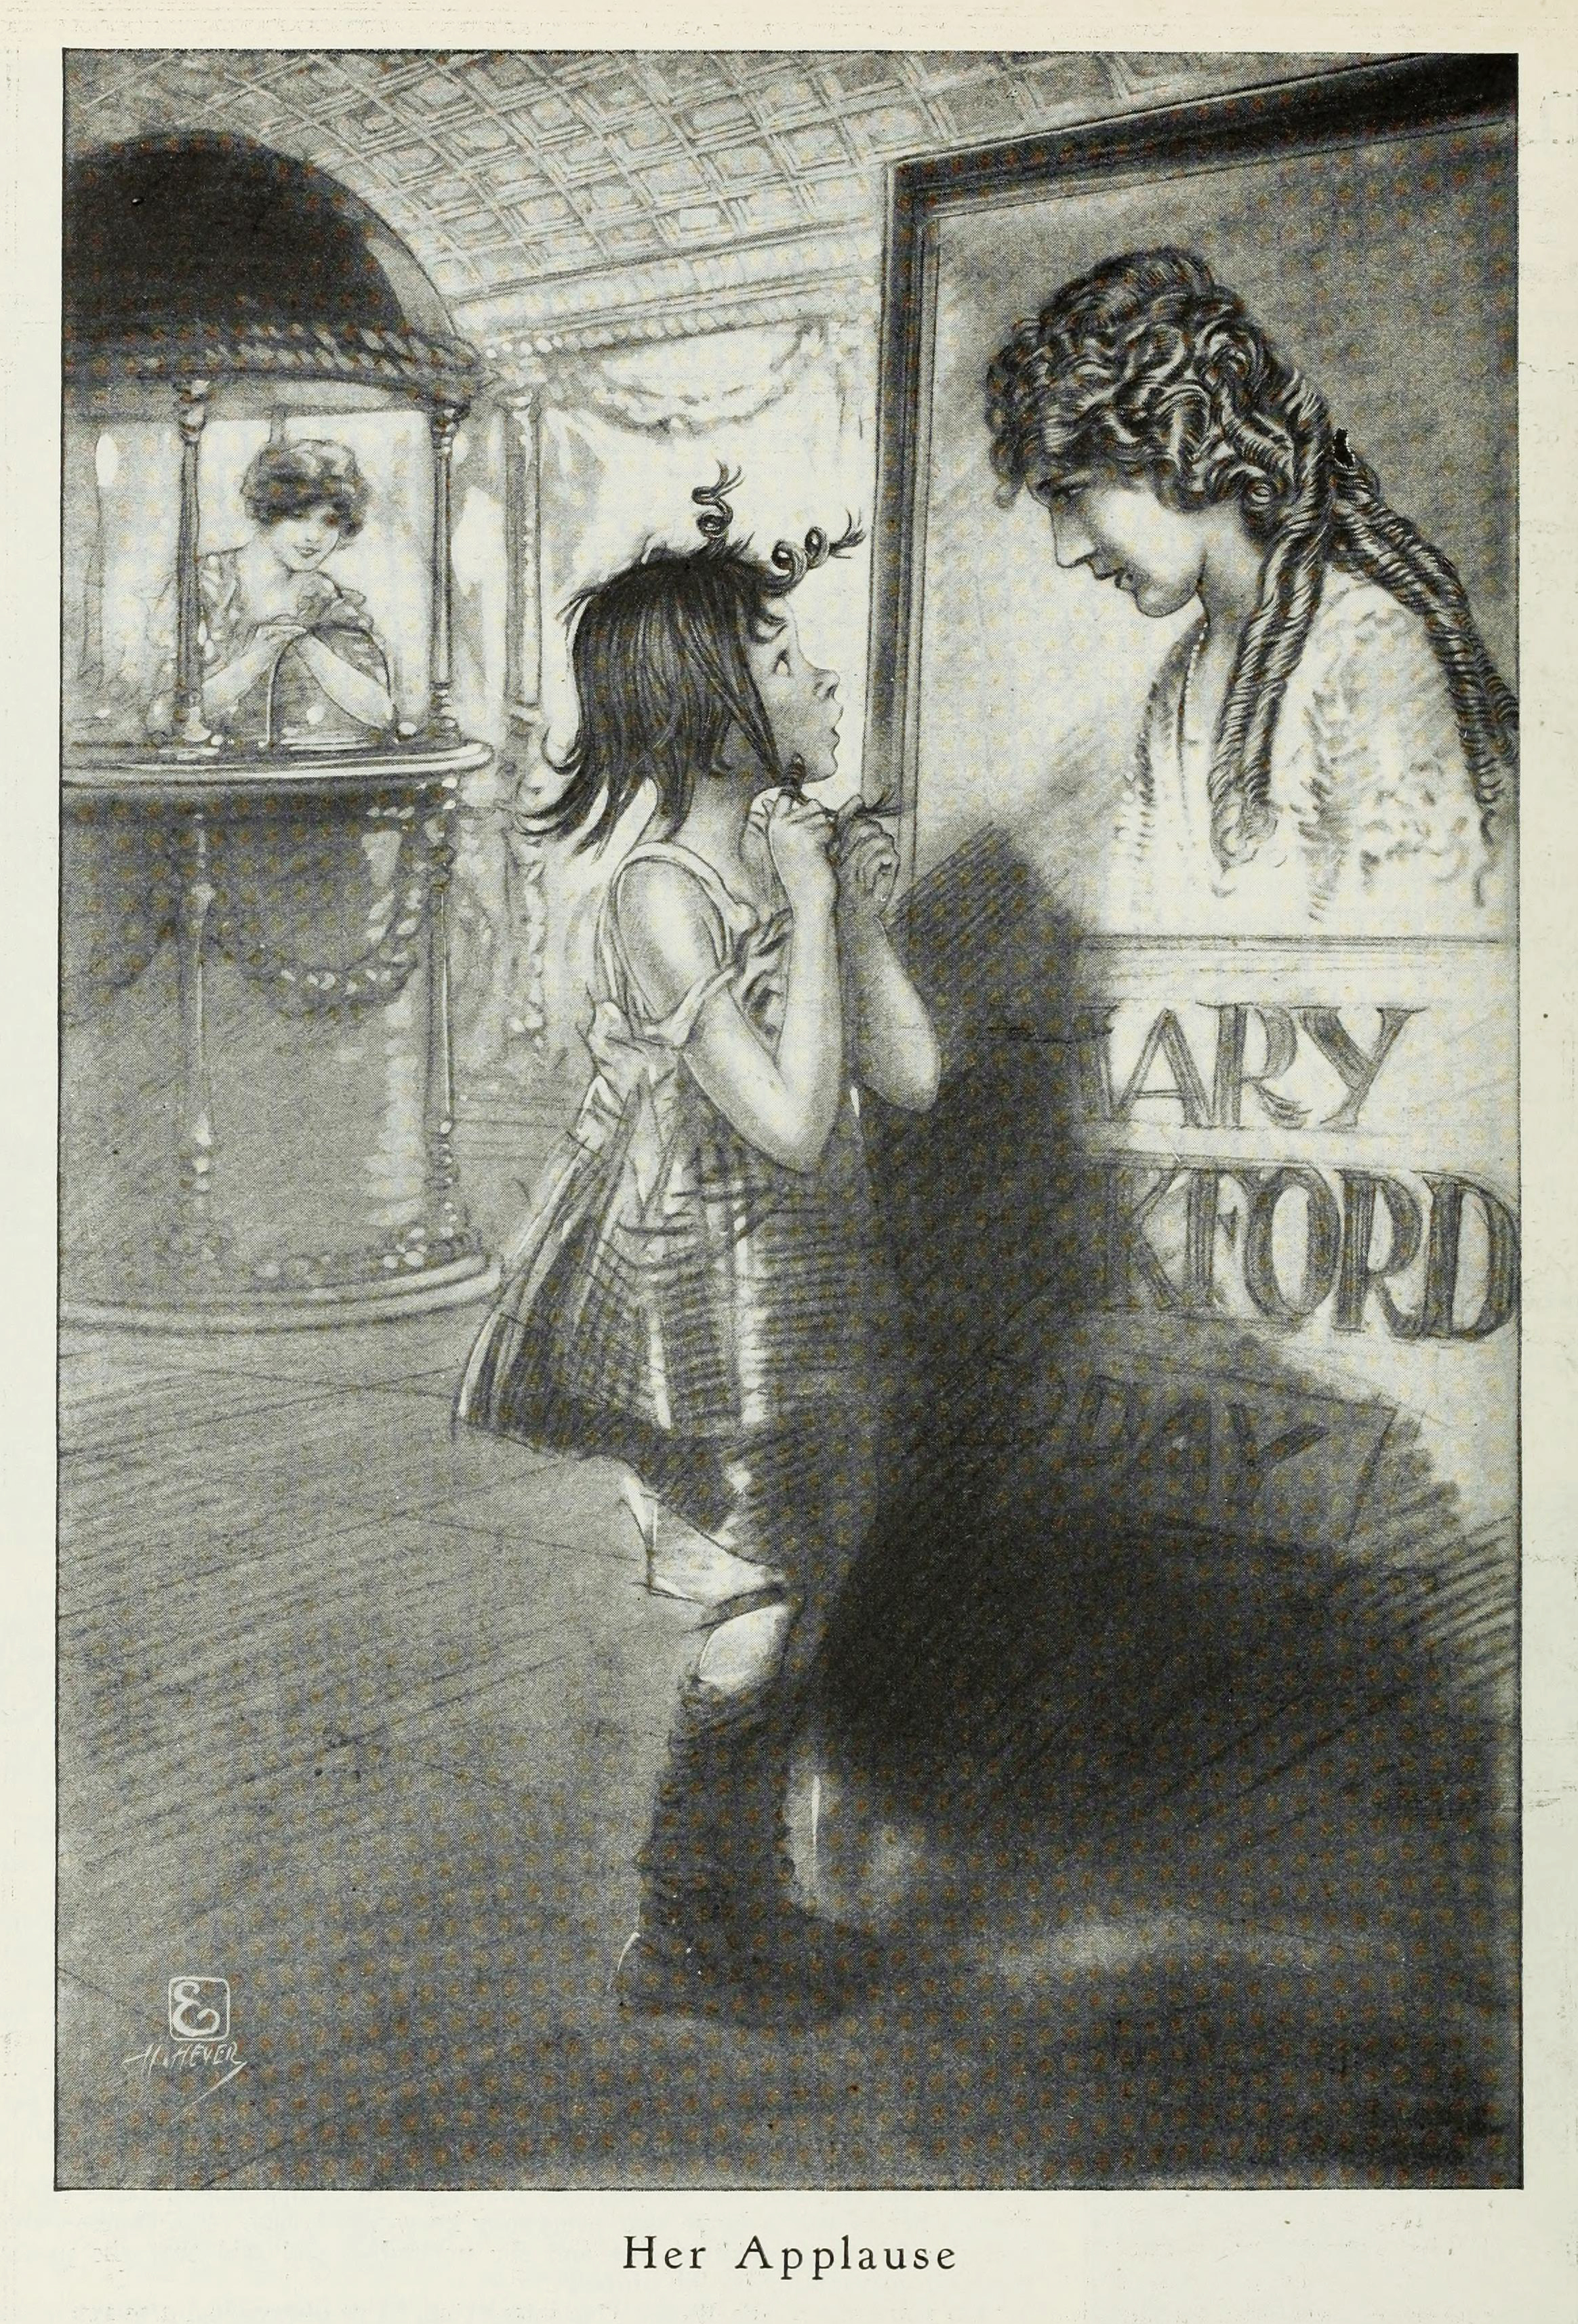 A Young Girl Admiring An Image of Mary Pickford From Photoplay Circa 1920